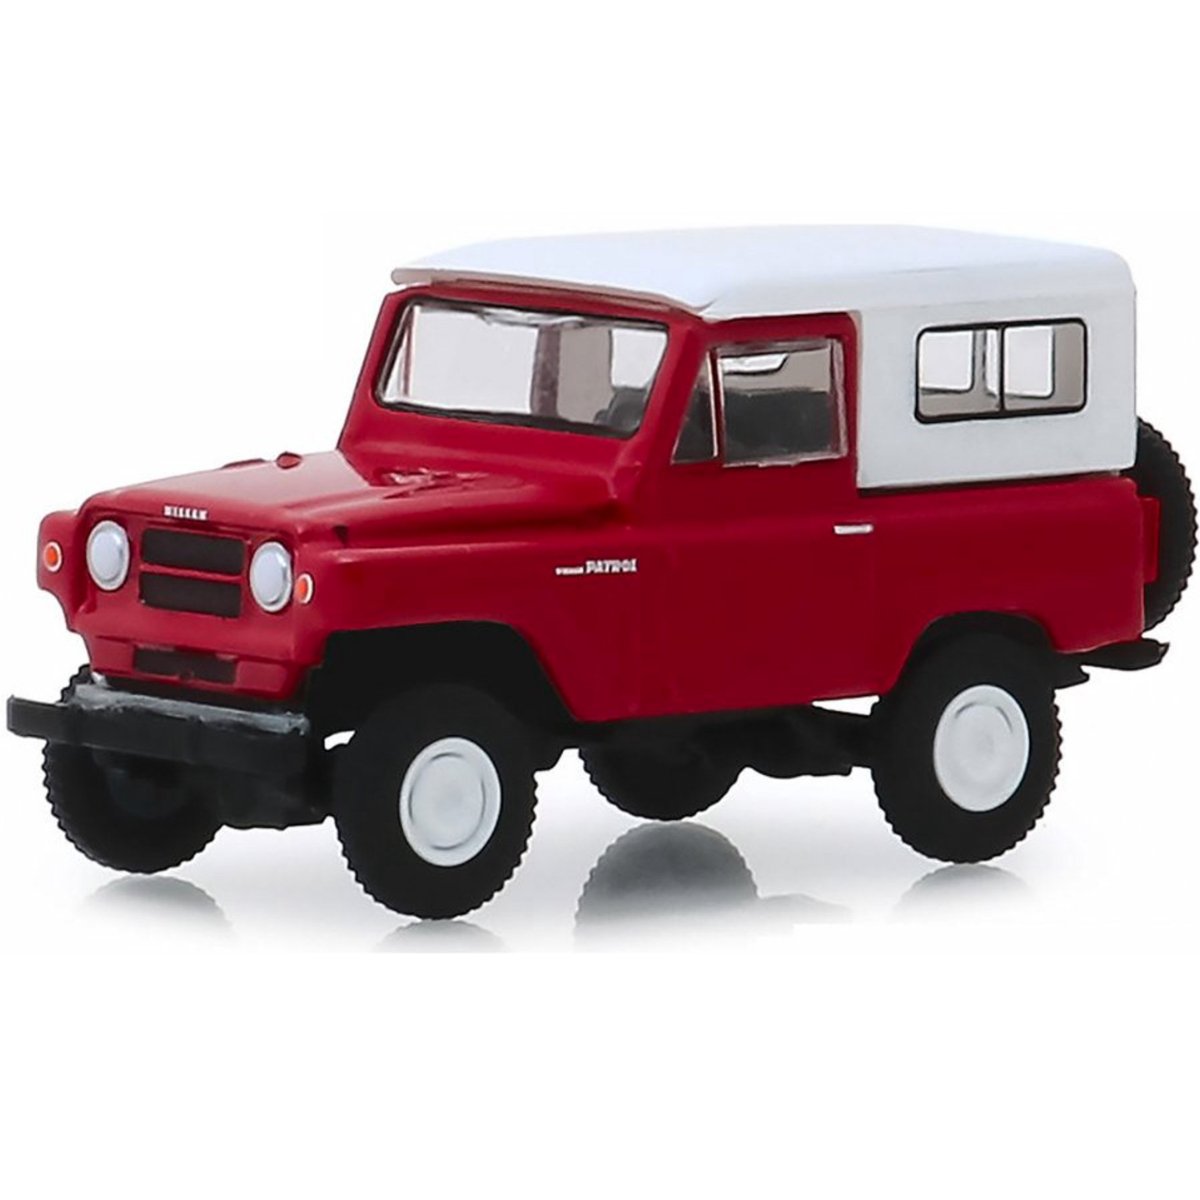 Greenlight 1971 Nissan Patrol (60) Red - 1:64 Scale